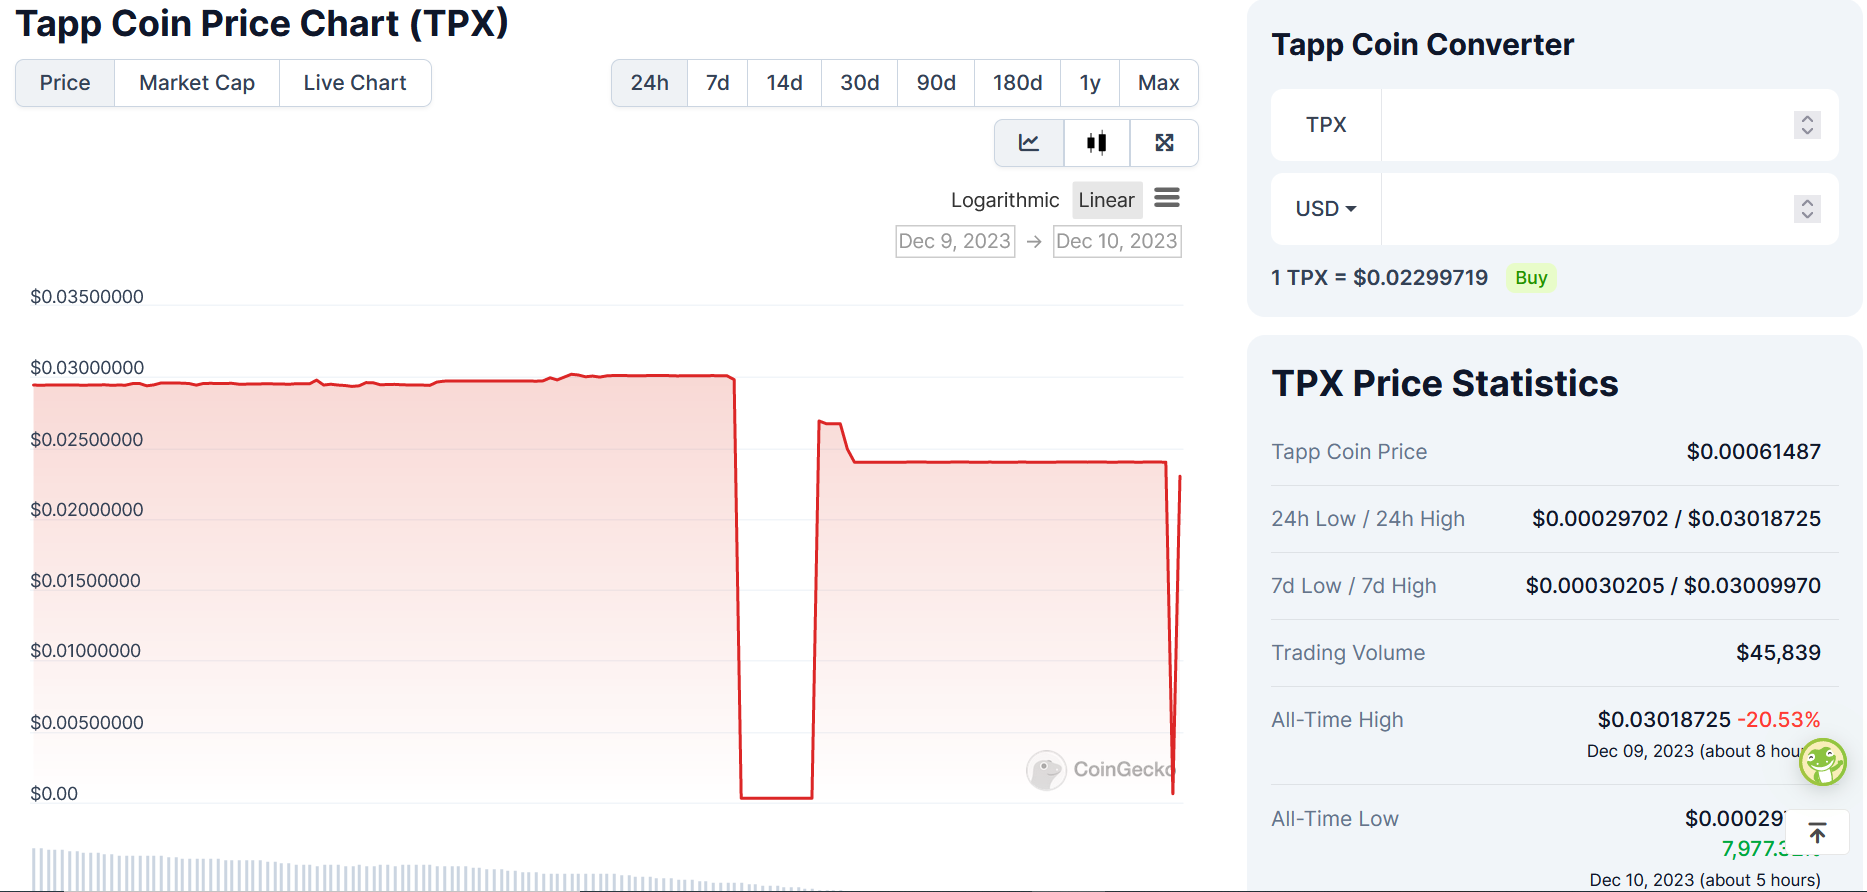 Tapp Coin Price Chart